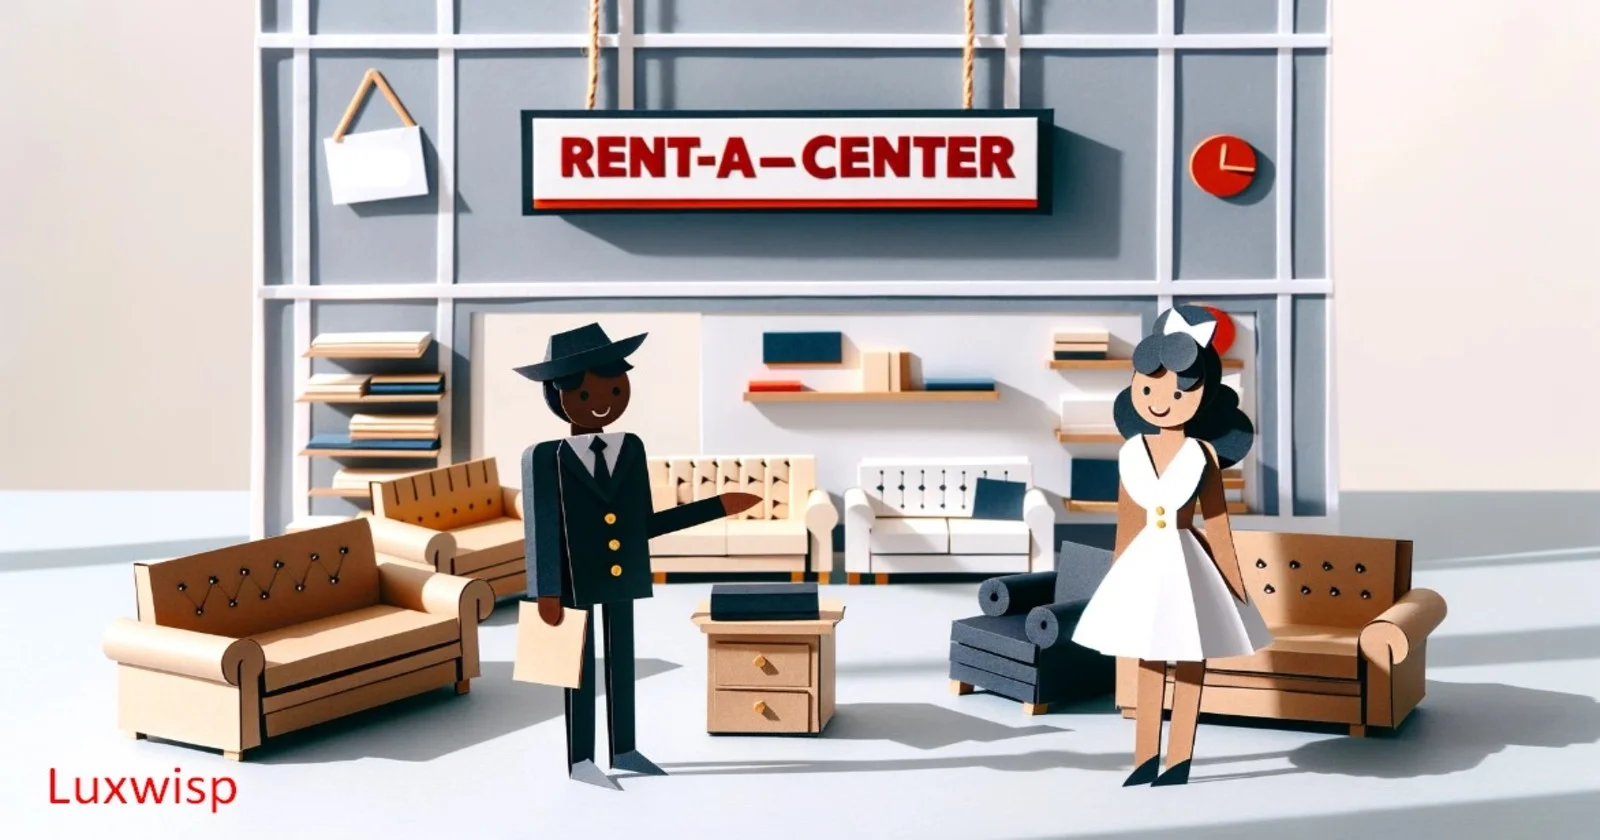 20 Pros and Cons of Rent-A-Center